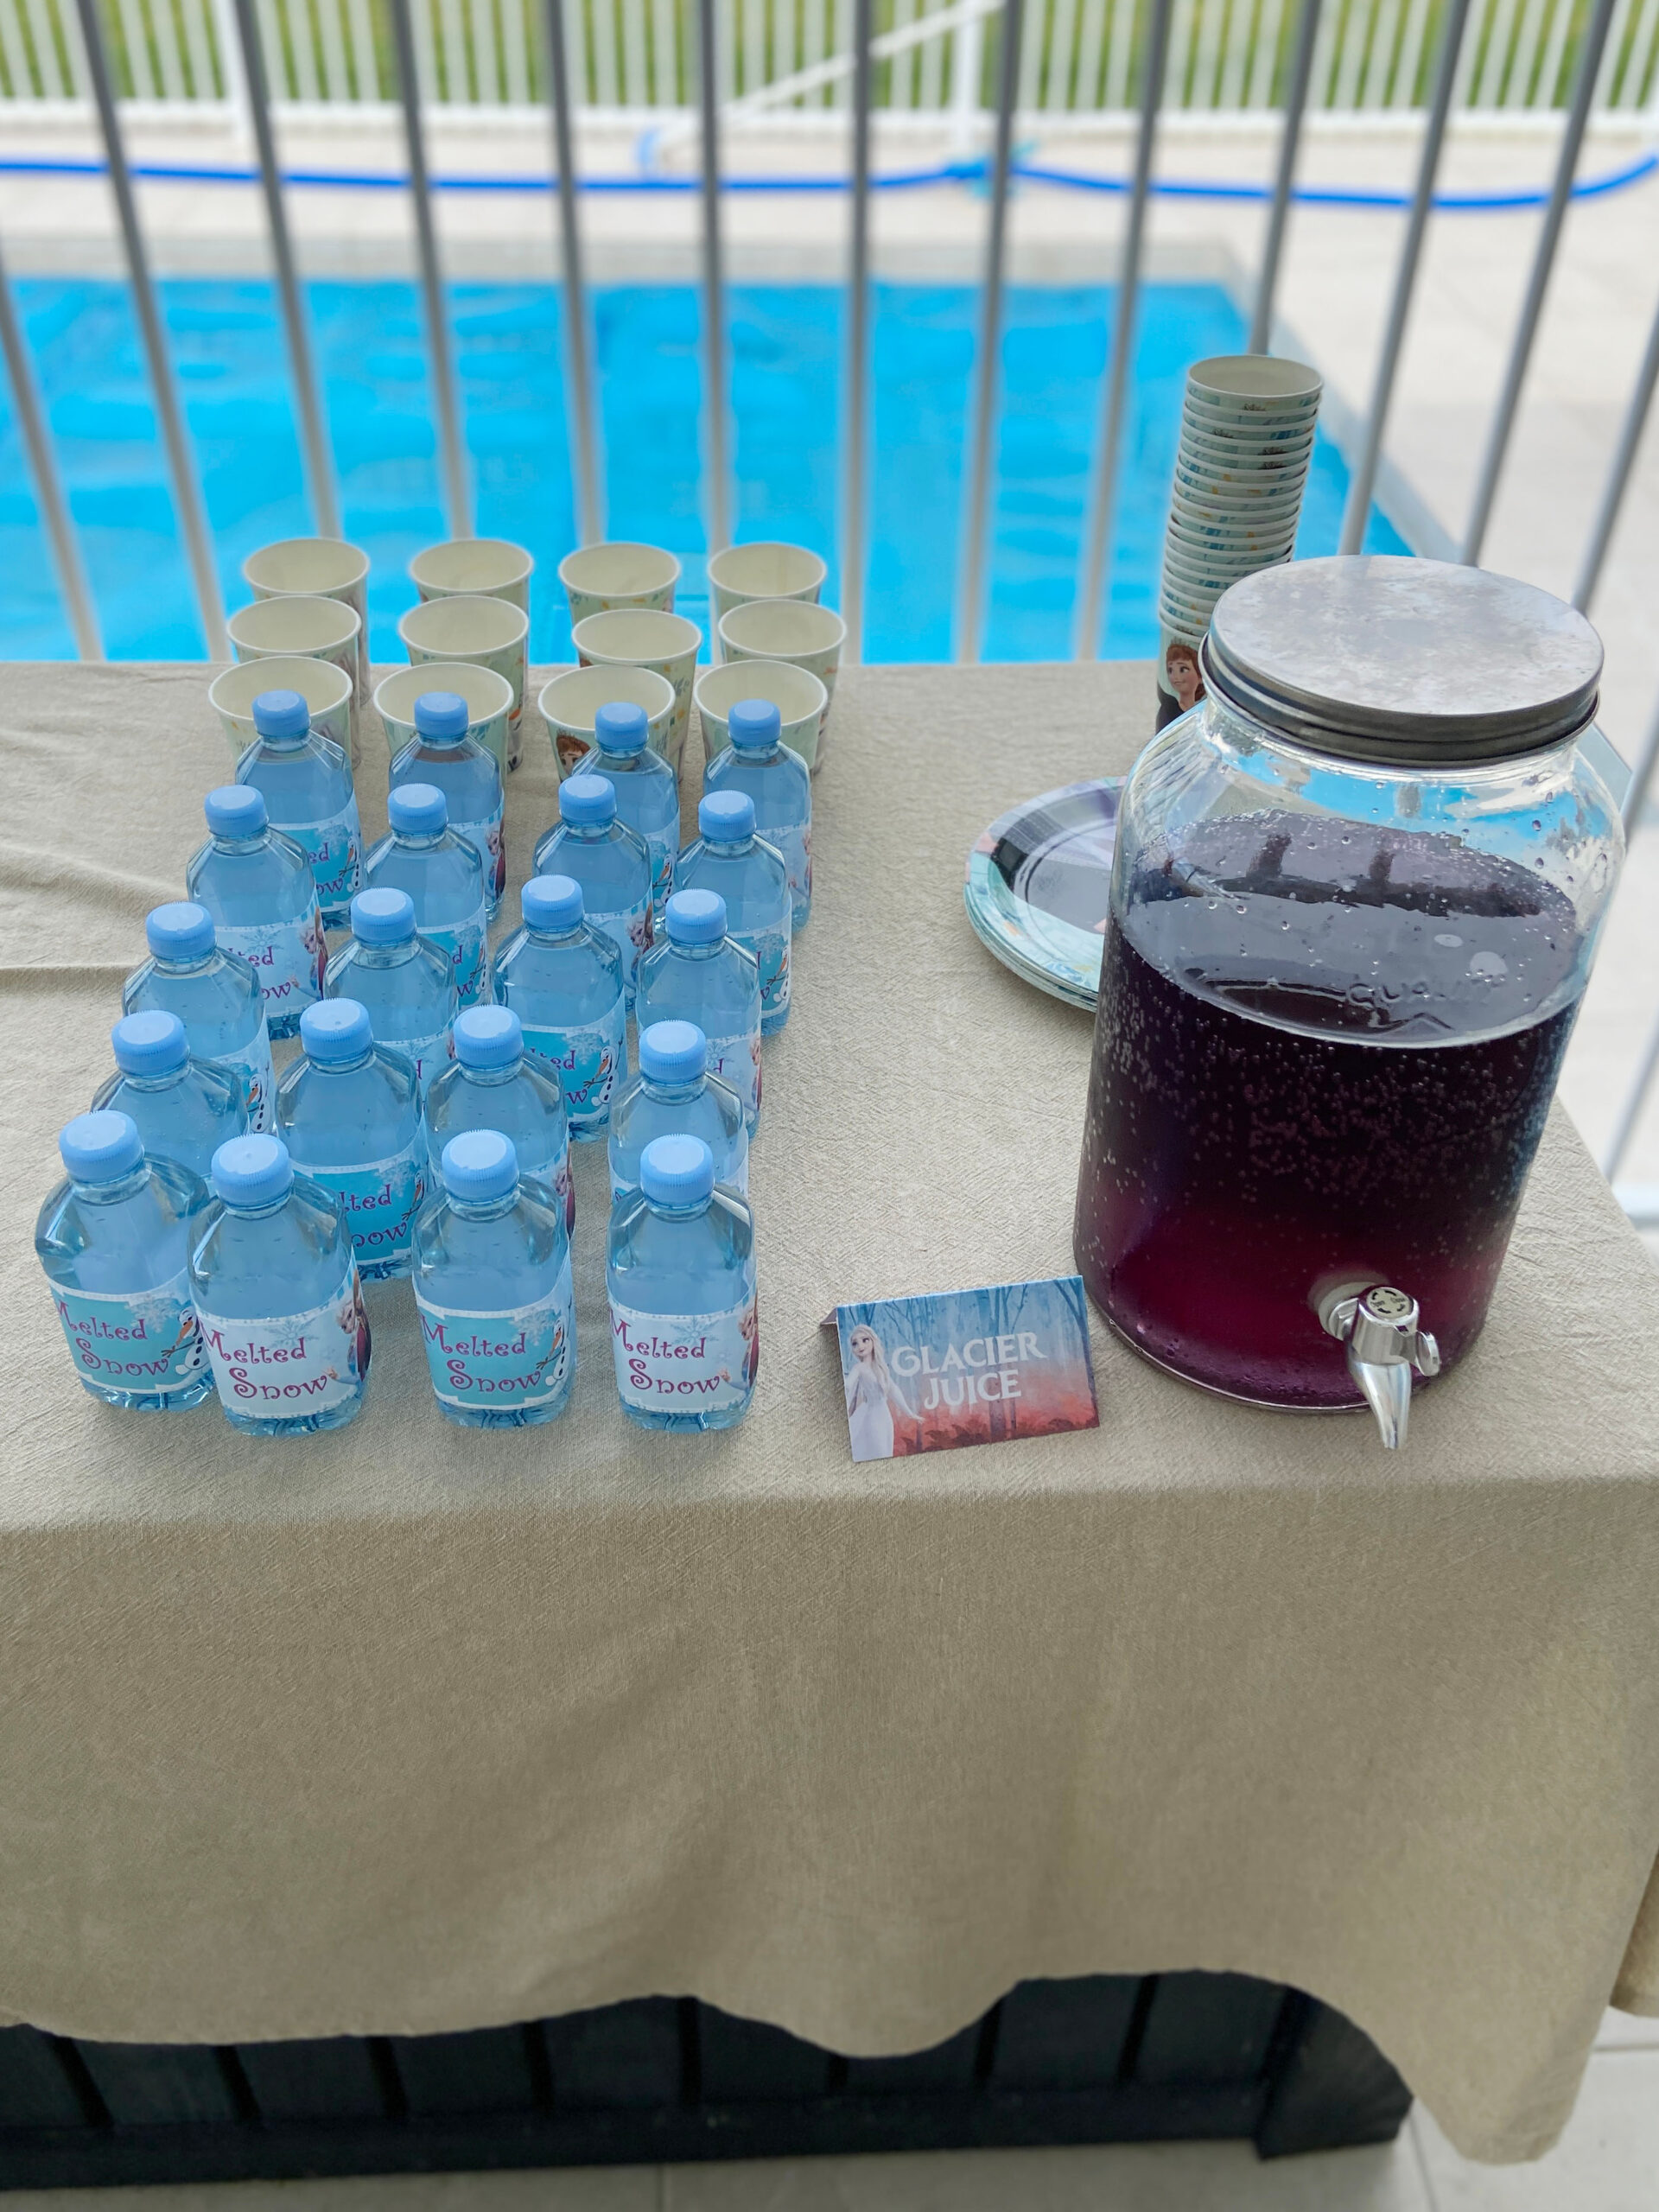 Melted Snow and Glacier Juice Frozen Themed Party Drinks